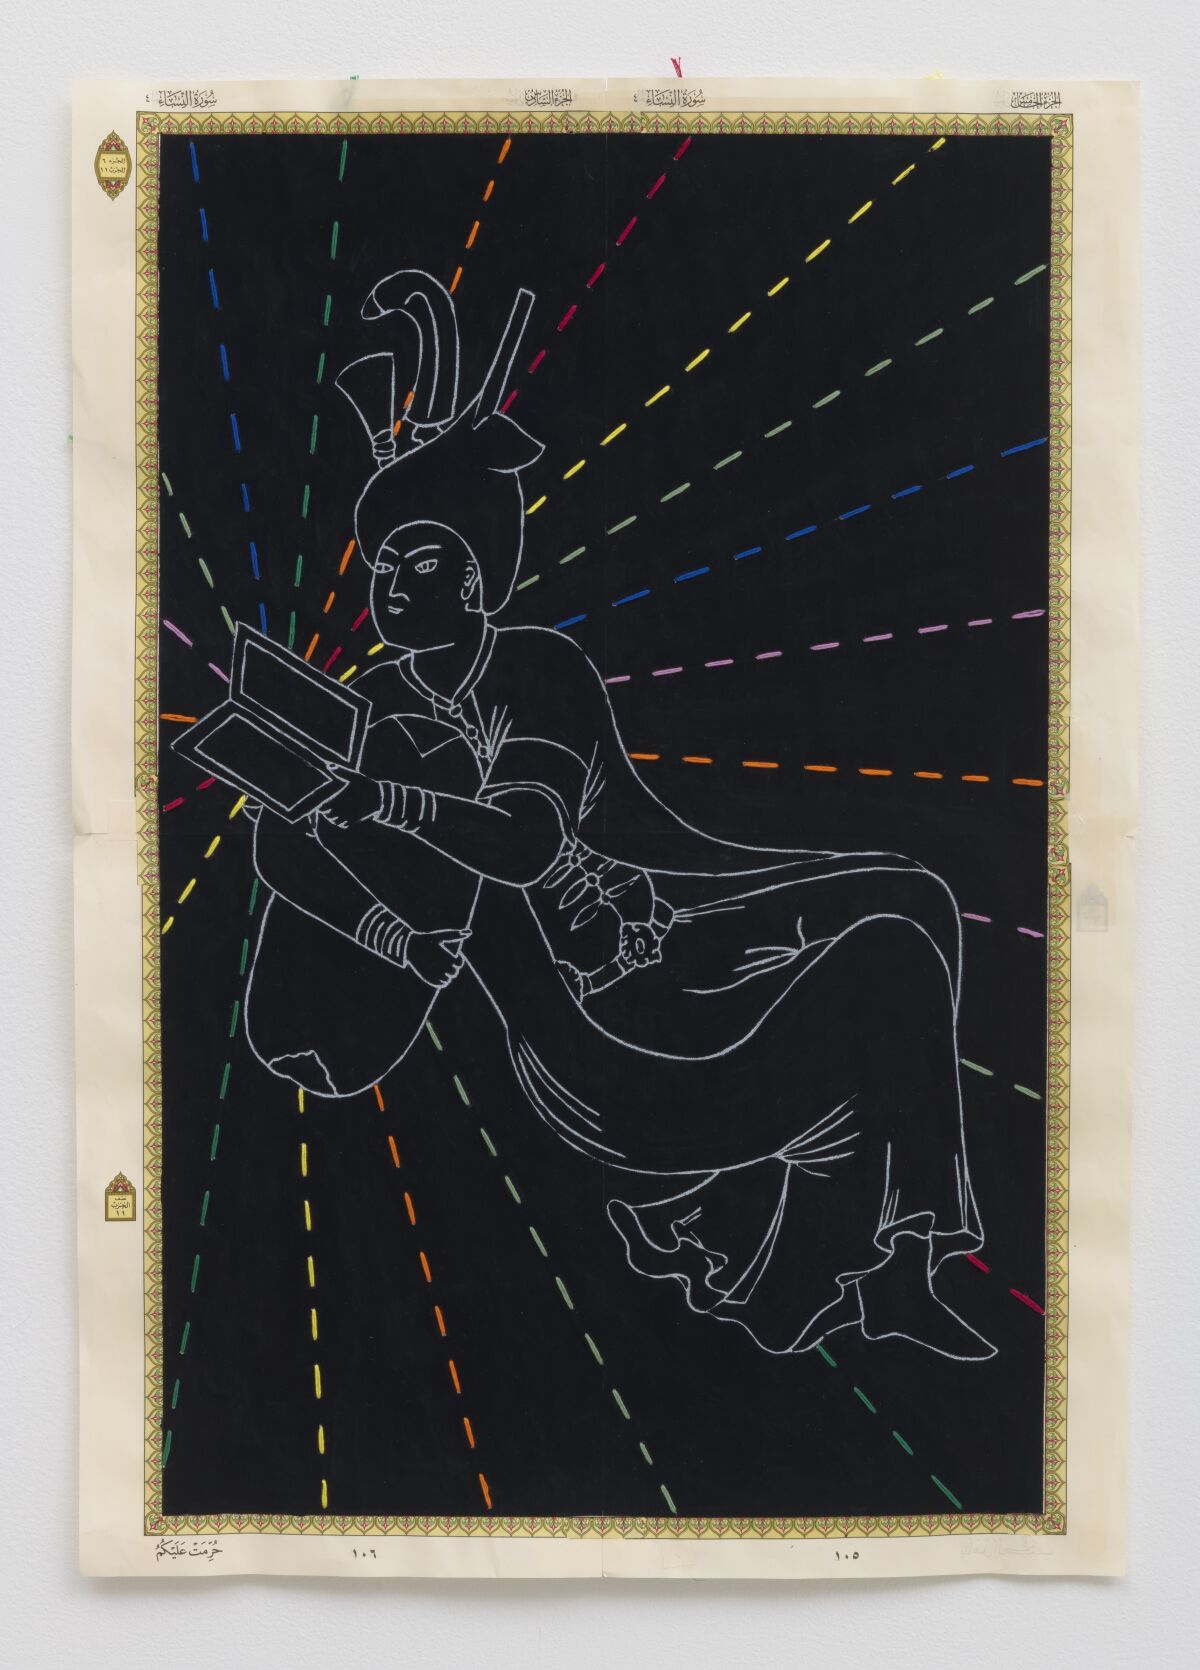 “Enlightened Youth” by Ardeshir Tabrizi, 2019. Embroidery thread, gouache and graphite on printed paper, 26 inches by 19 inches